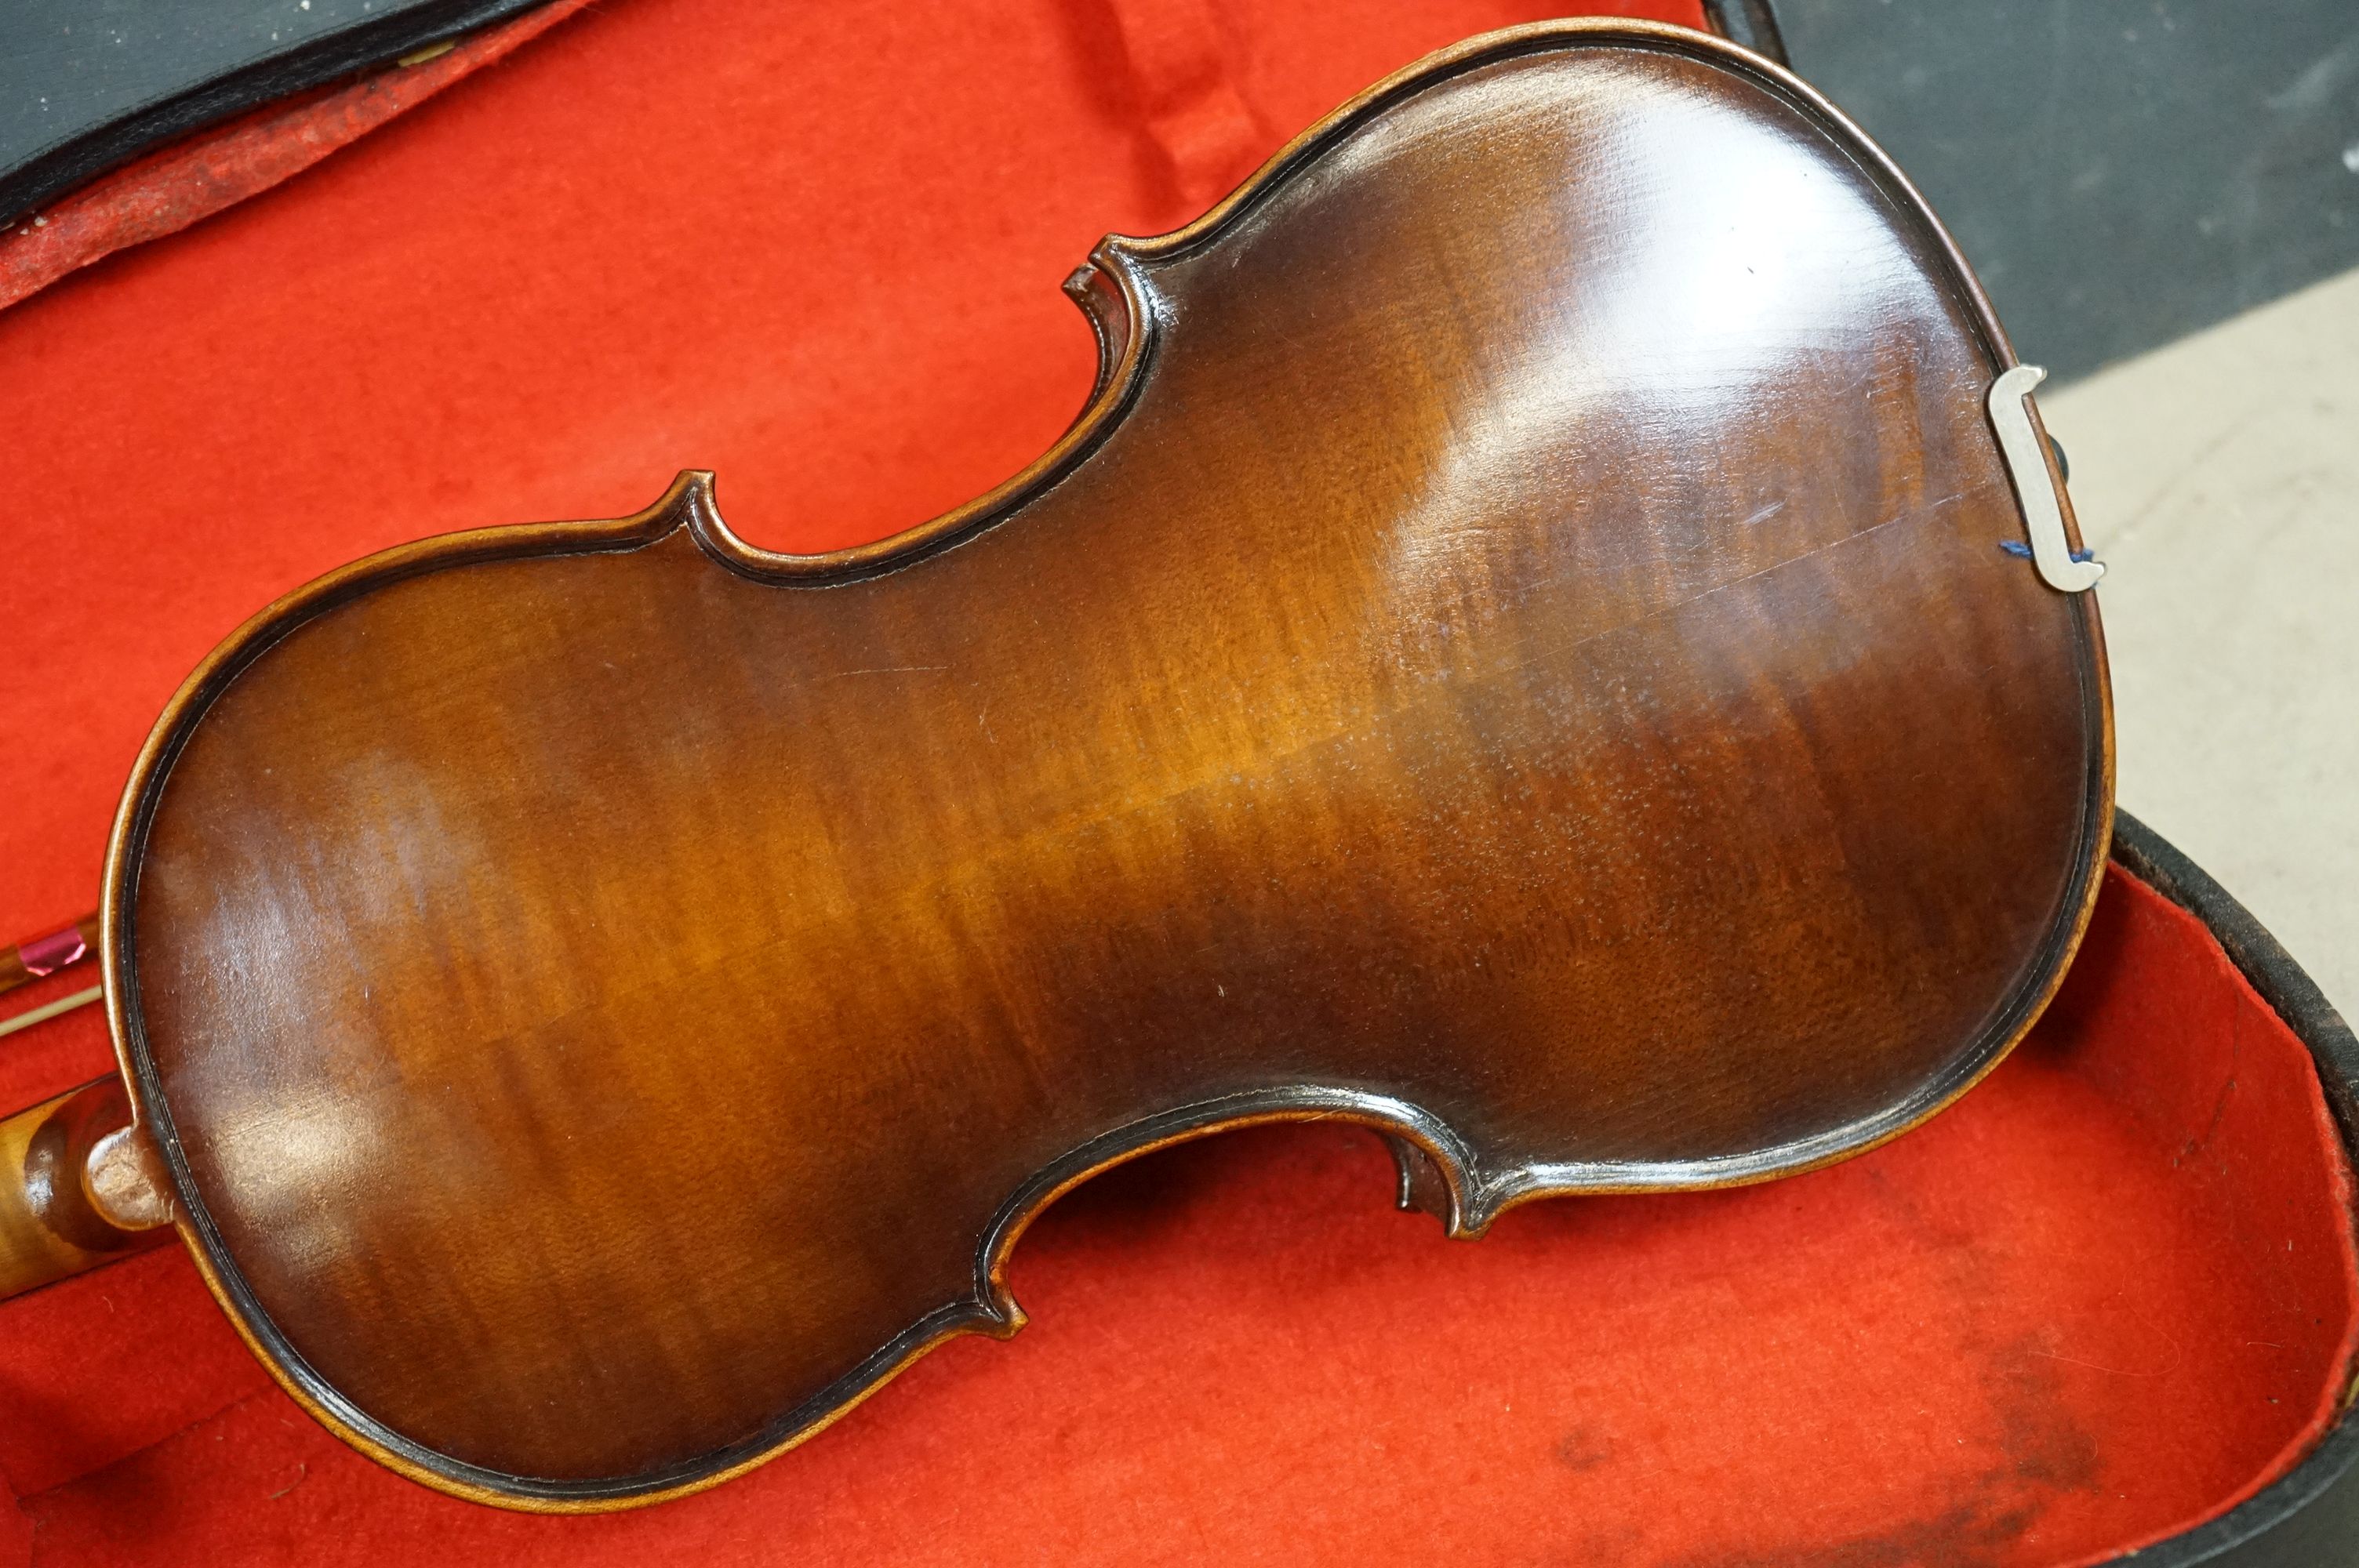 A violin and bow together with hardcase, import label for Boosey & Hawkes to inside of violin. - Image 5 of 10